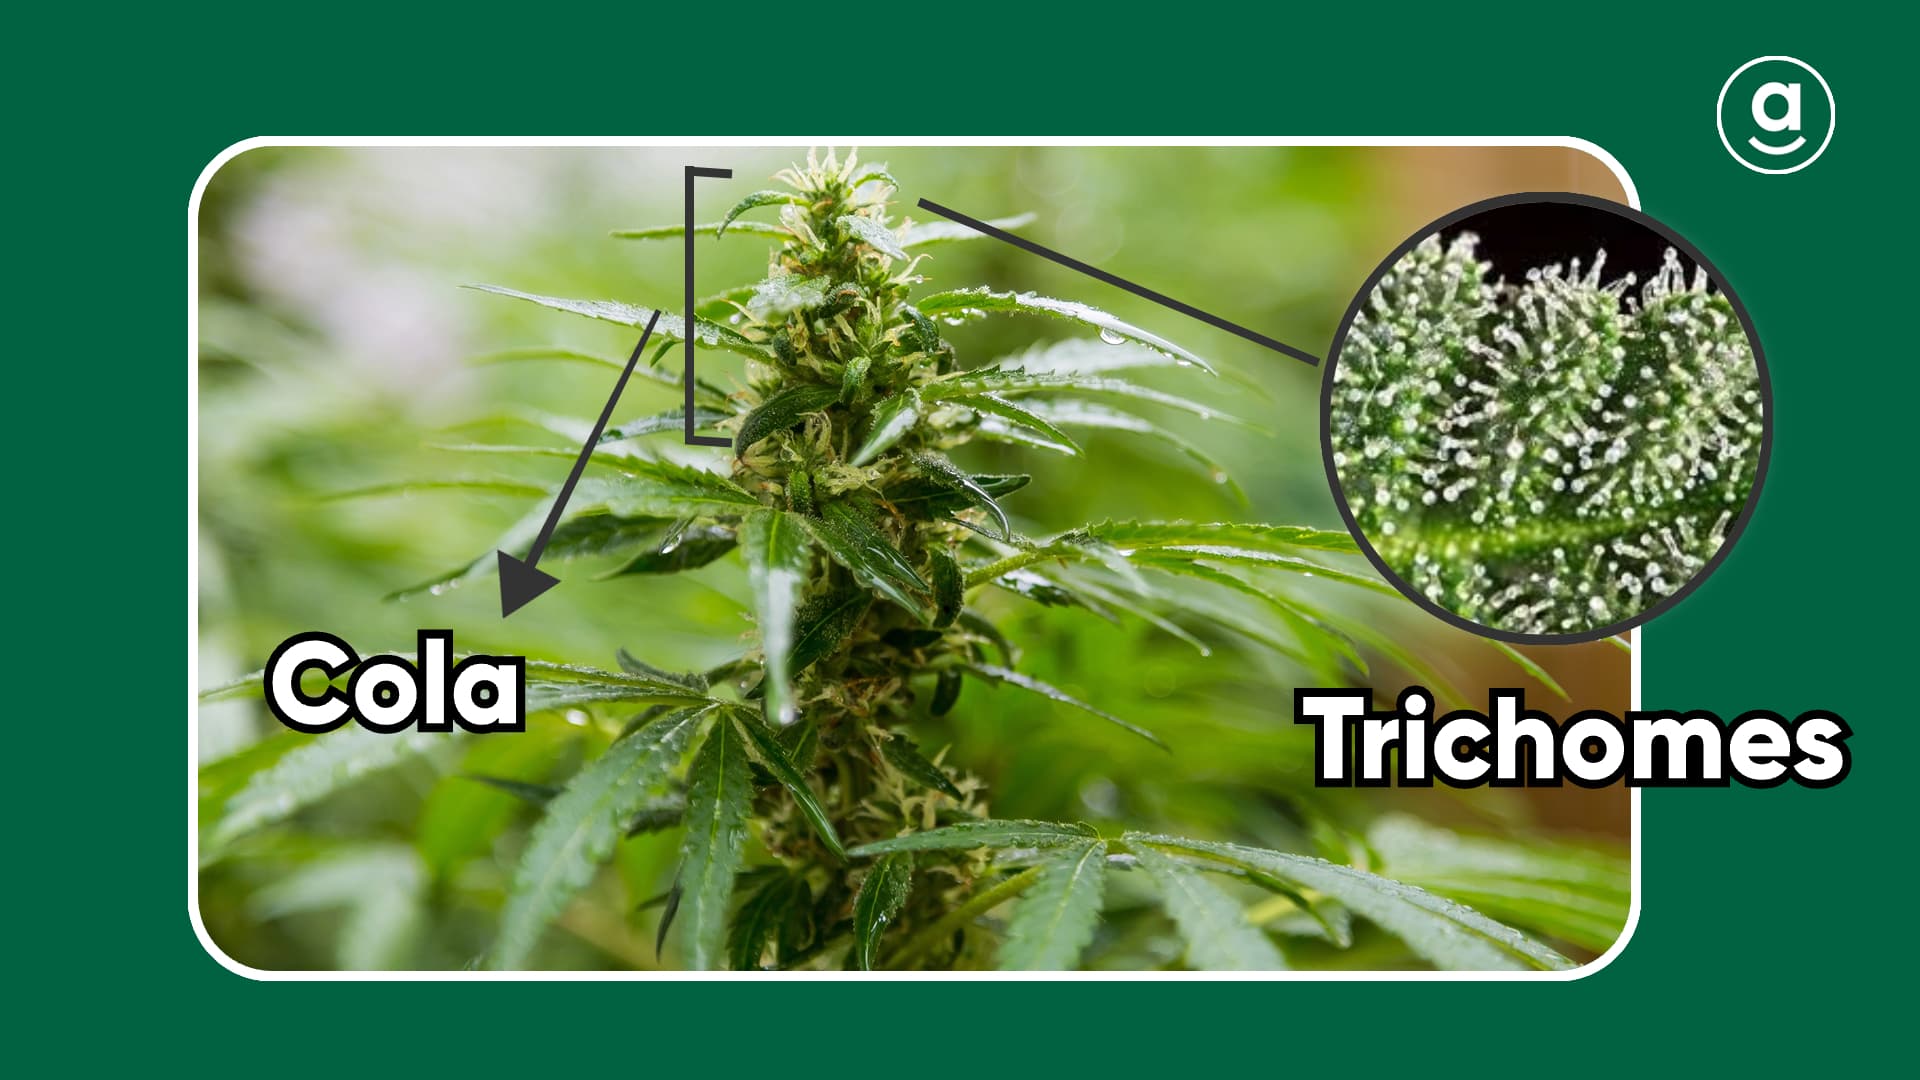 weed plant trichomes and cola